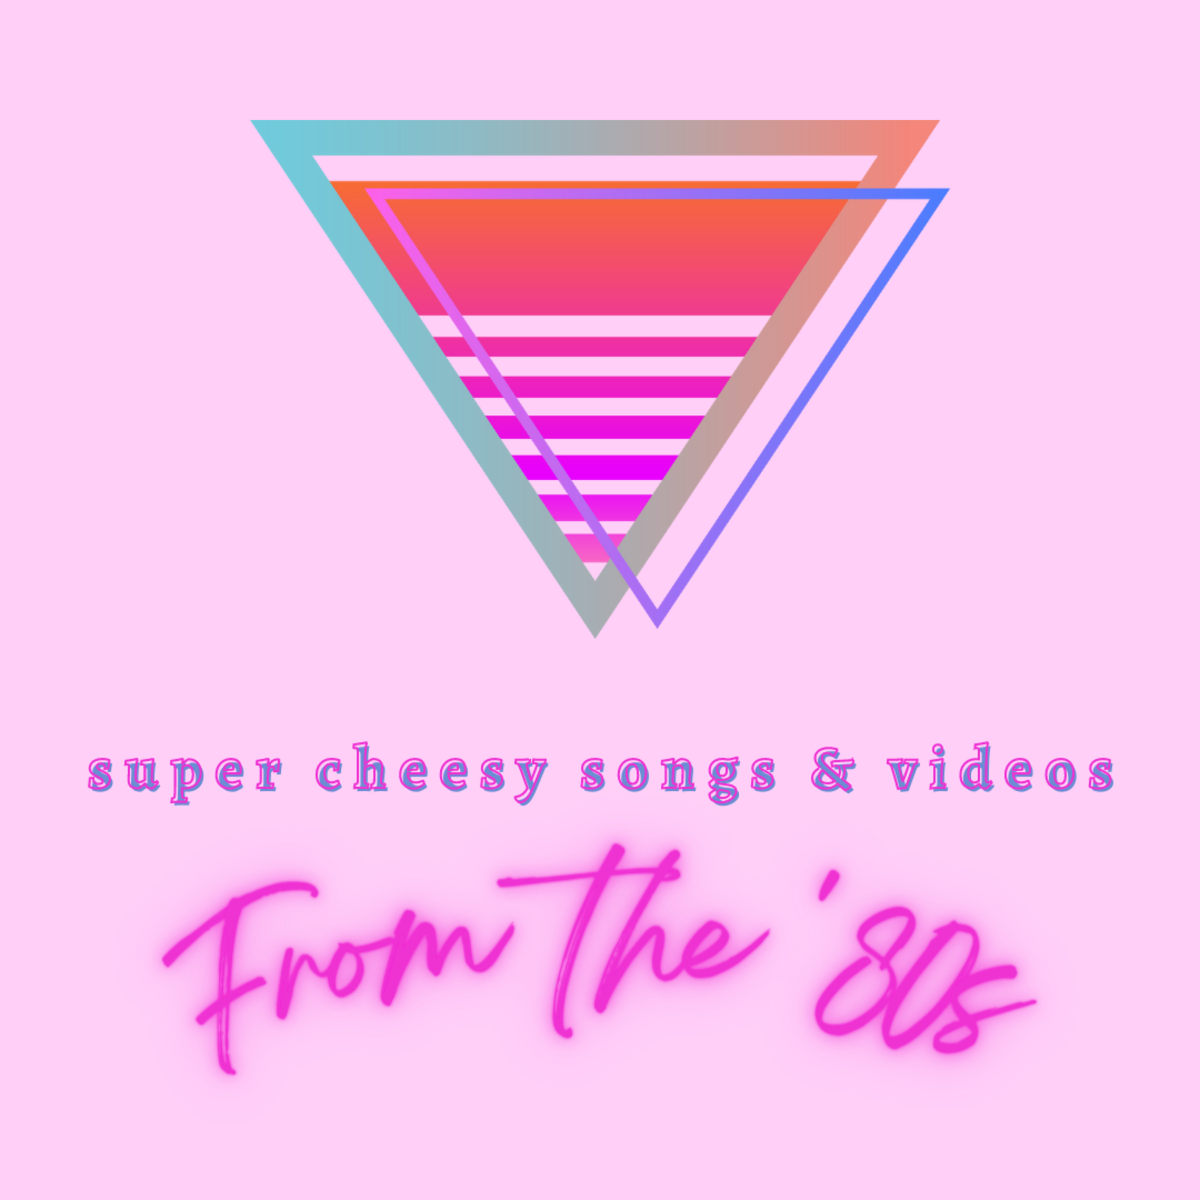 21 Cheesiest Songs and Music Videos of the 1980s